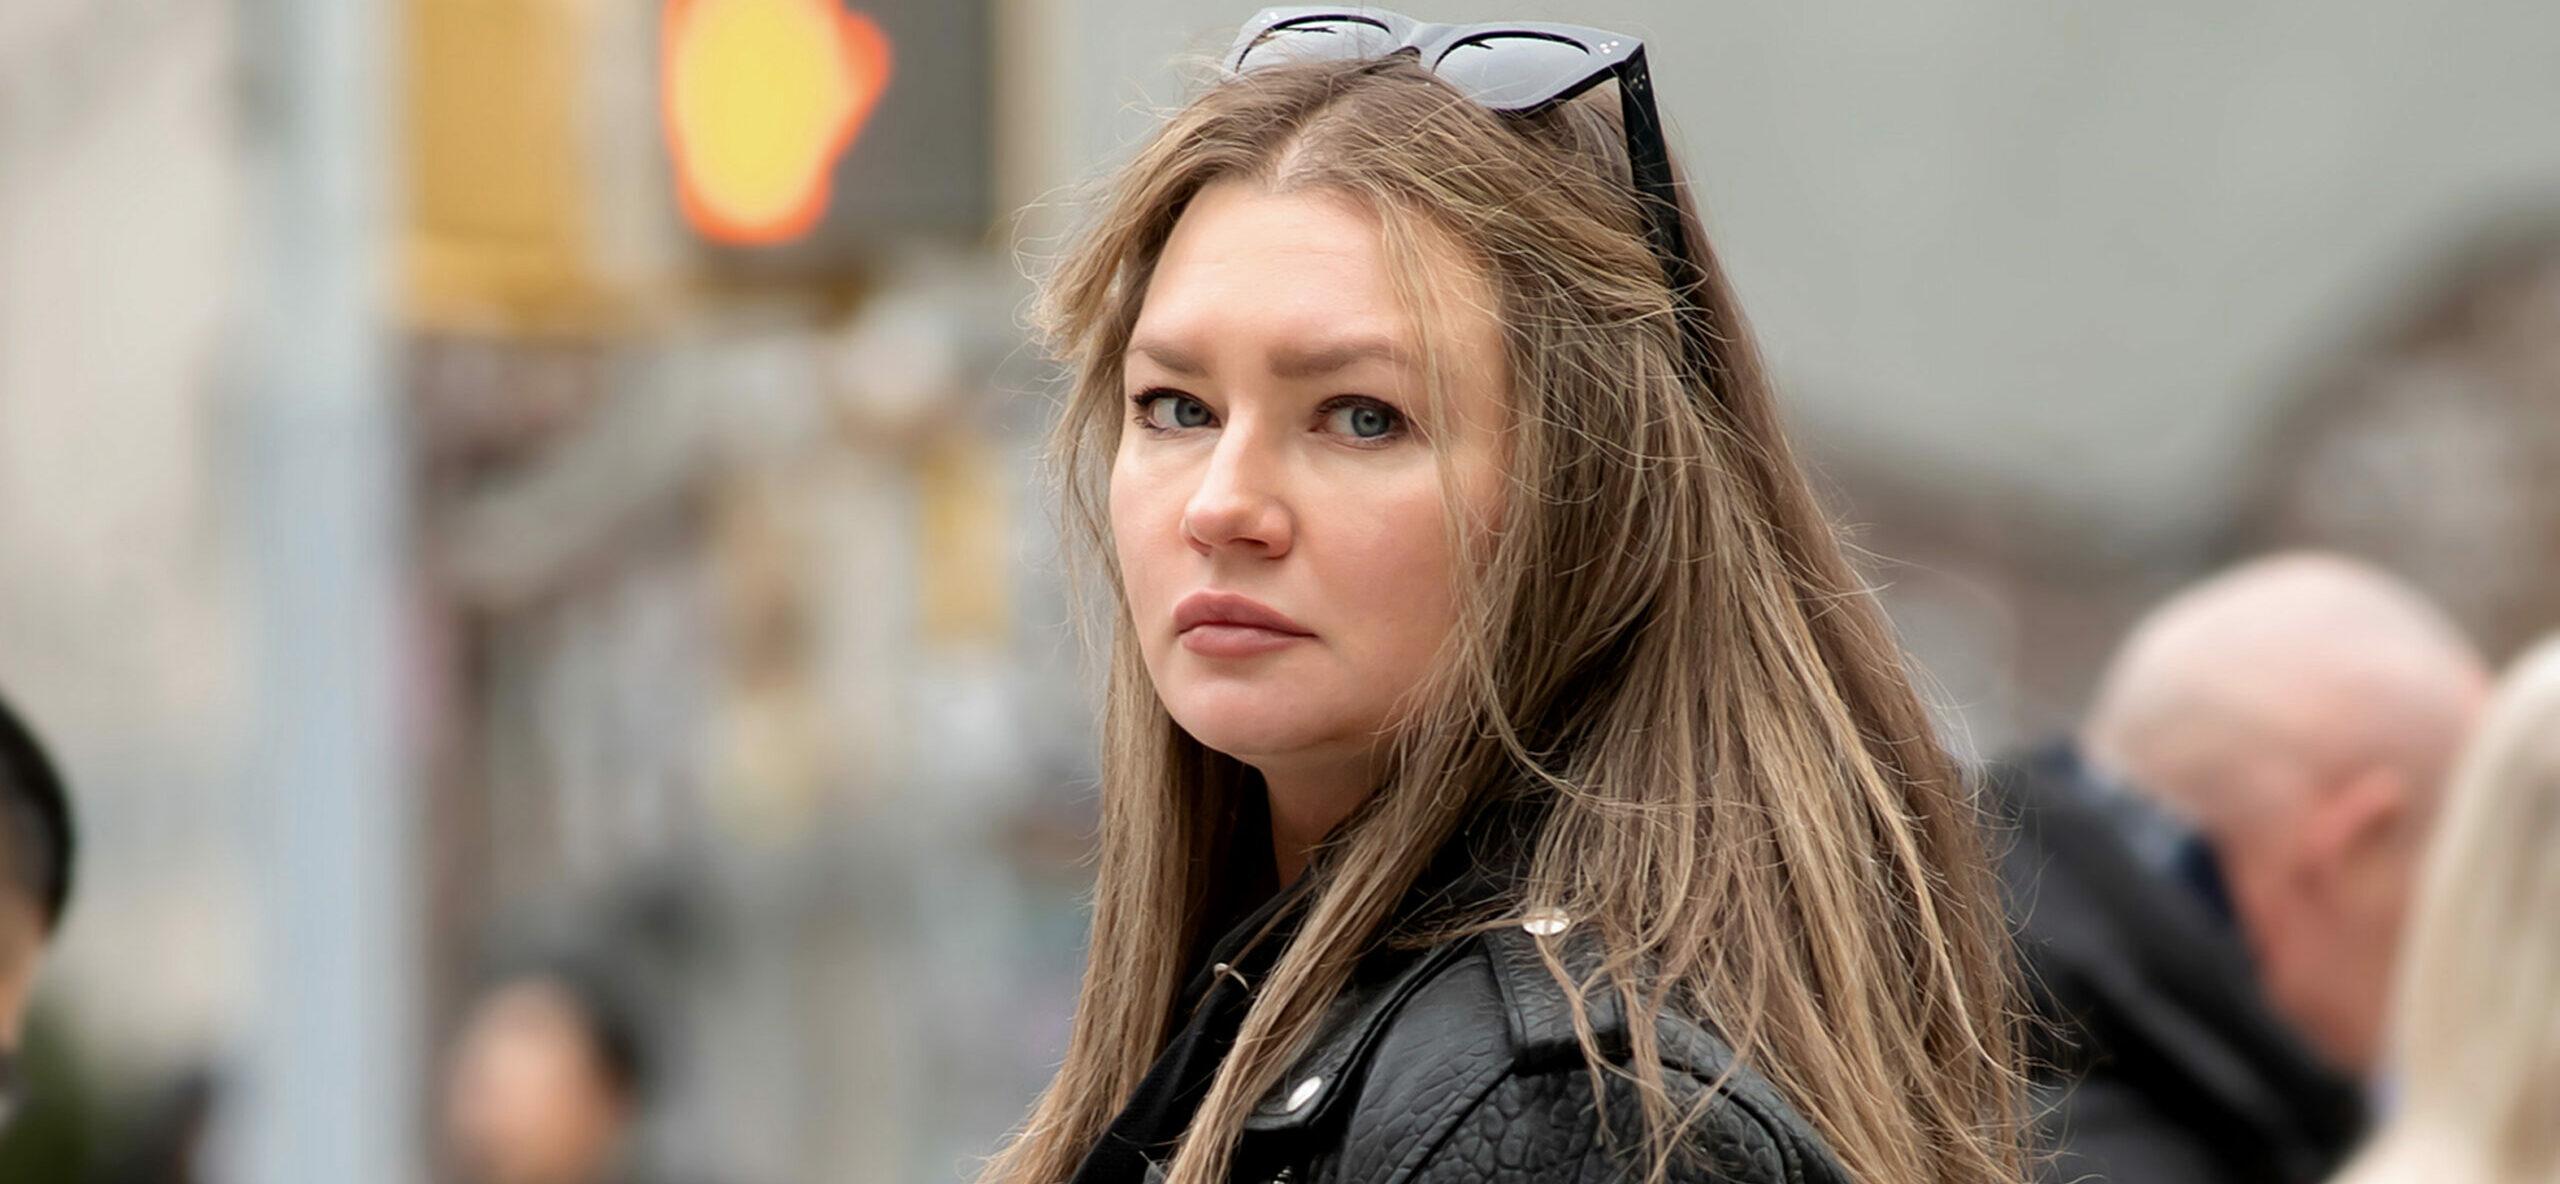 Anna Delvey Will Make Her Big Comeback With ‘Delvey’s Dinner Club’ Series!